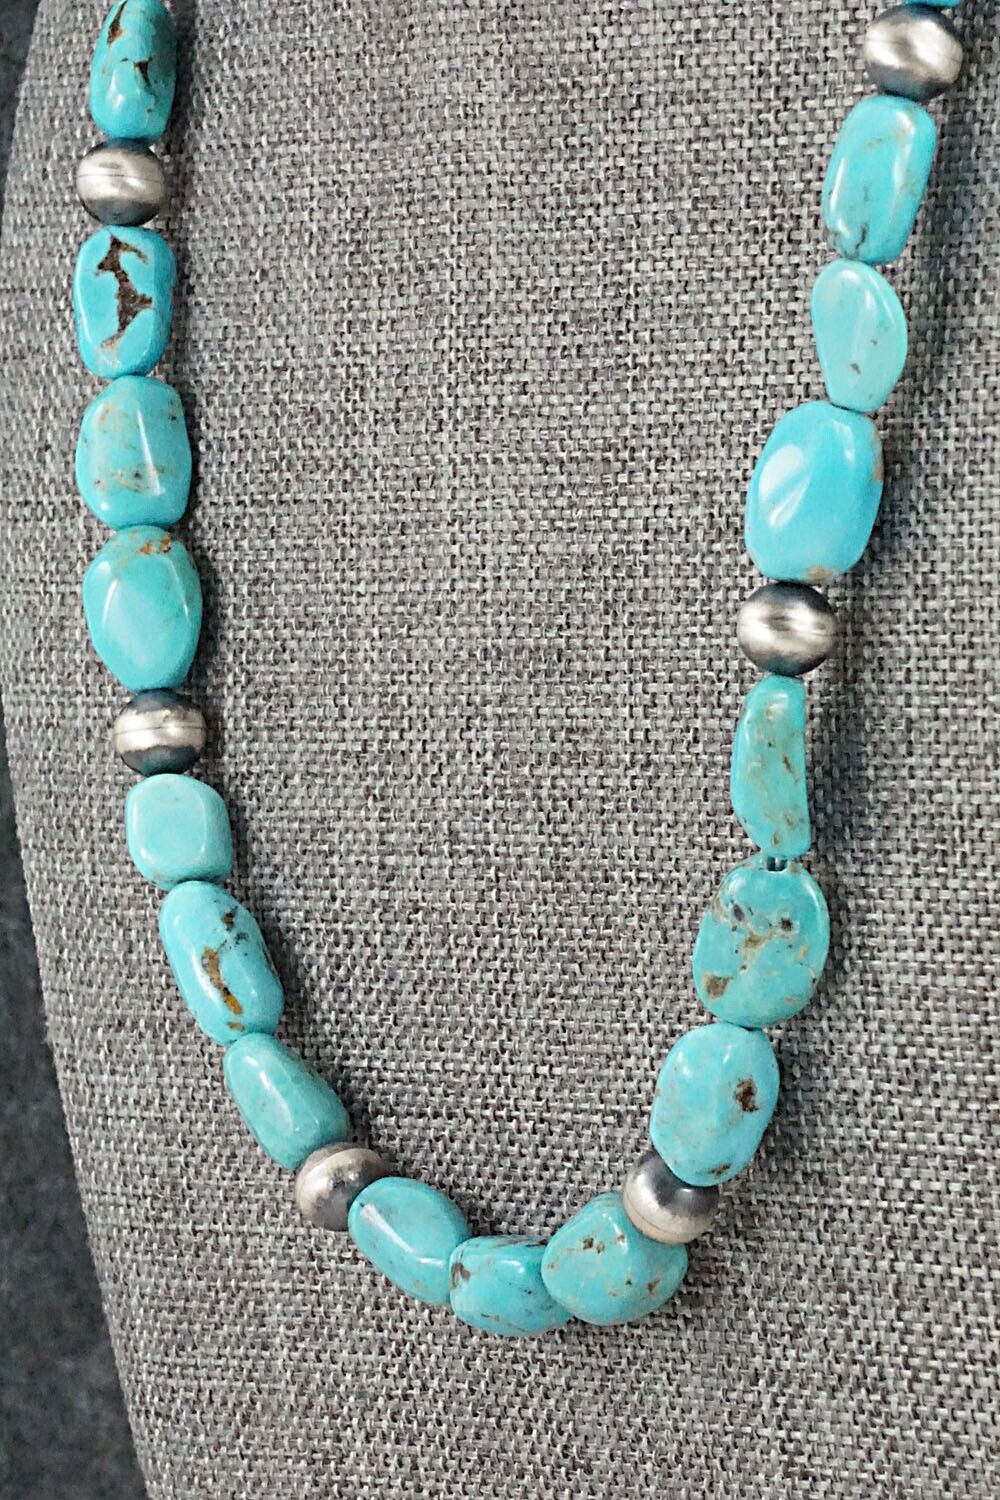 Turquoise & Sterling Silver Necklace - Doreen Jake